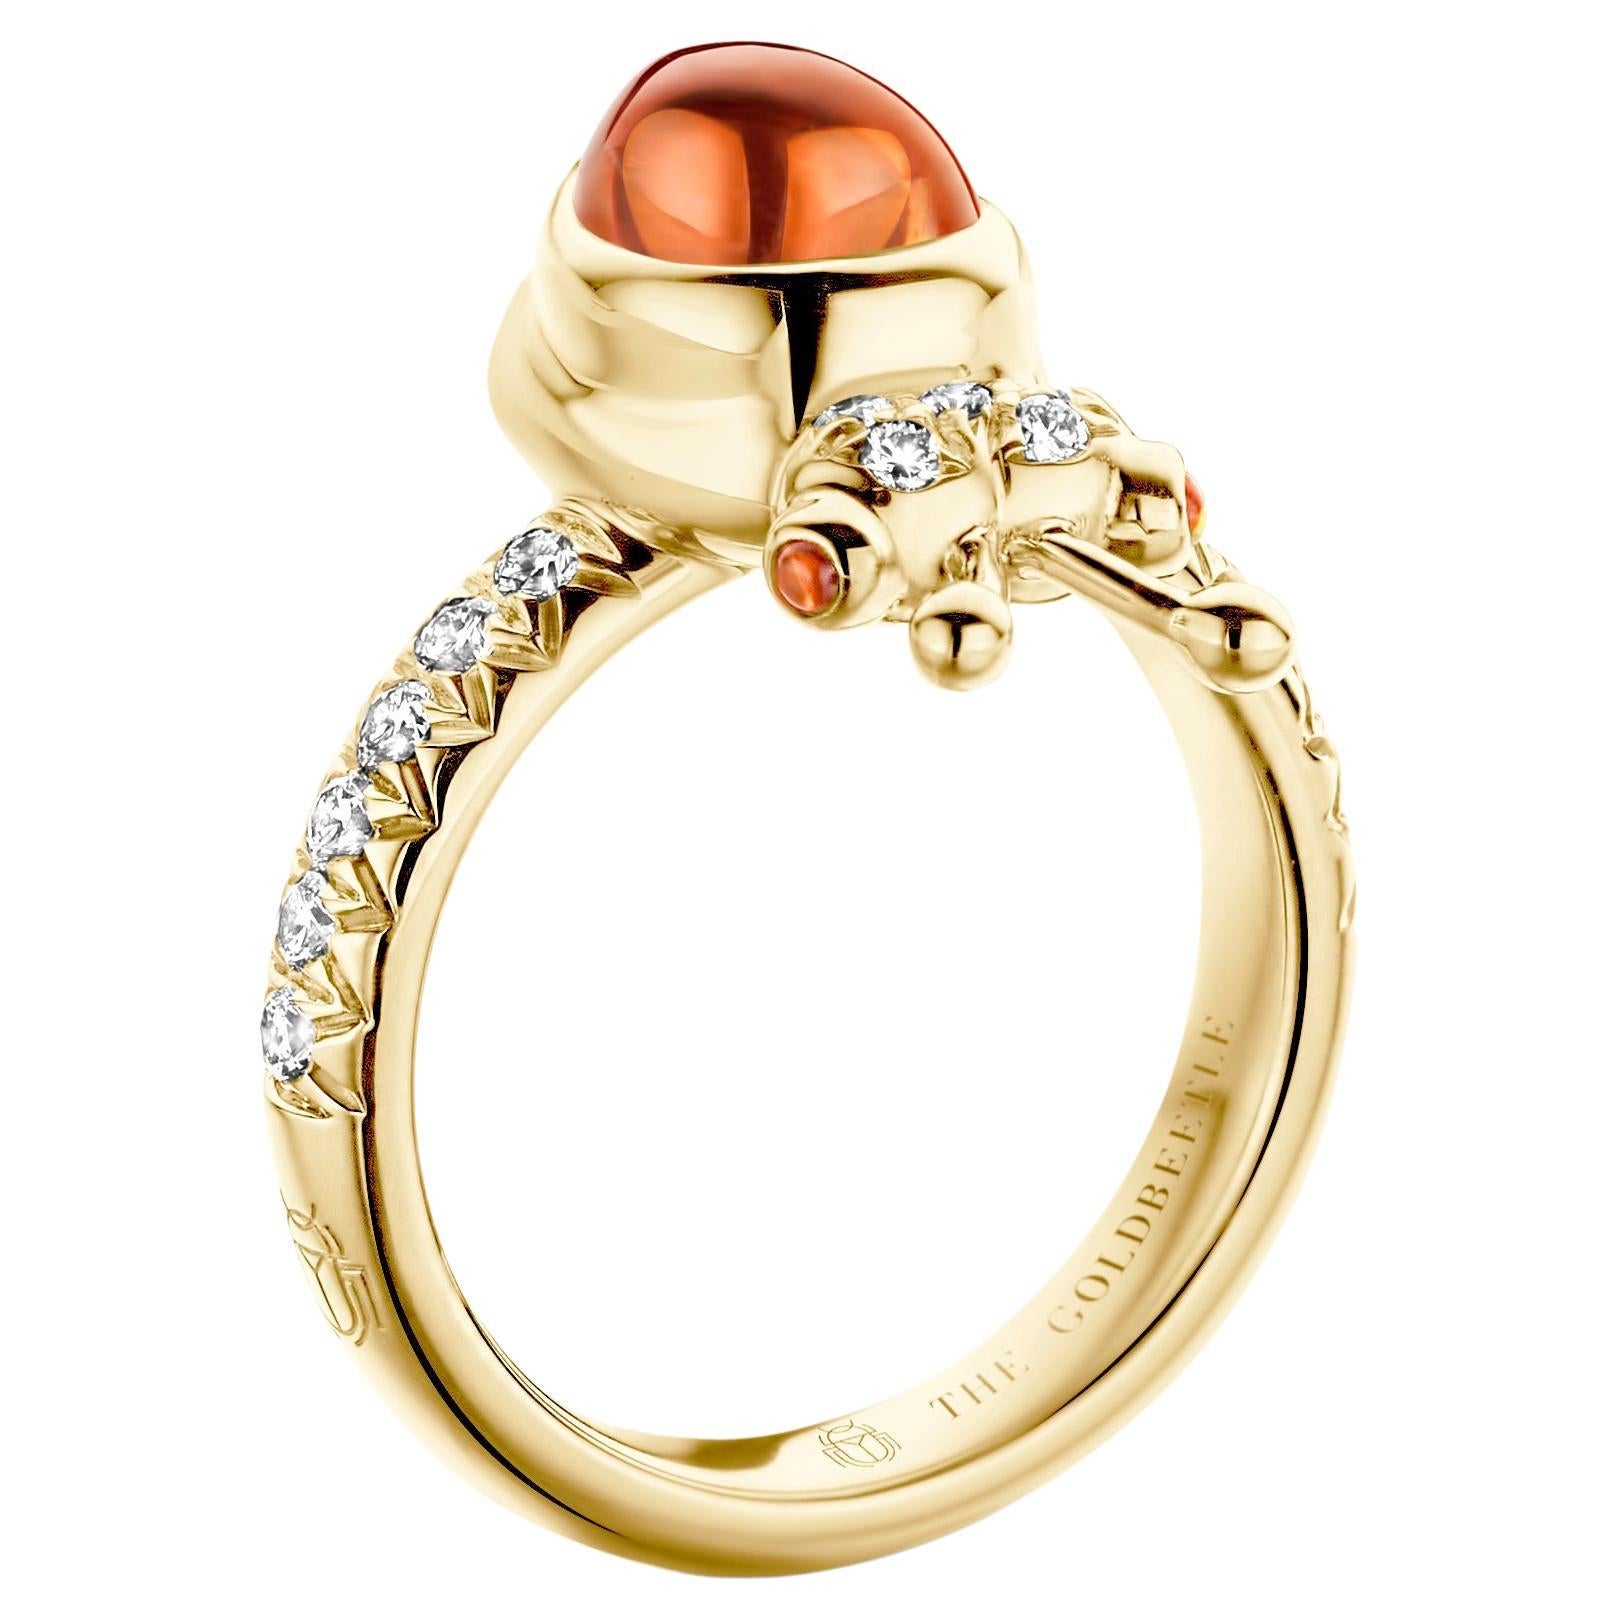 One-of-a-kind lucky beetle ring in 18K yellow gold 8,6 g set with the finest diamonds in brilliant cut 0,34Ct (VVS/DEF quality) one natural, mandarin garnet in pear cabochon cut and two pink tourmalines in round cabochon cut.